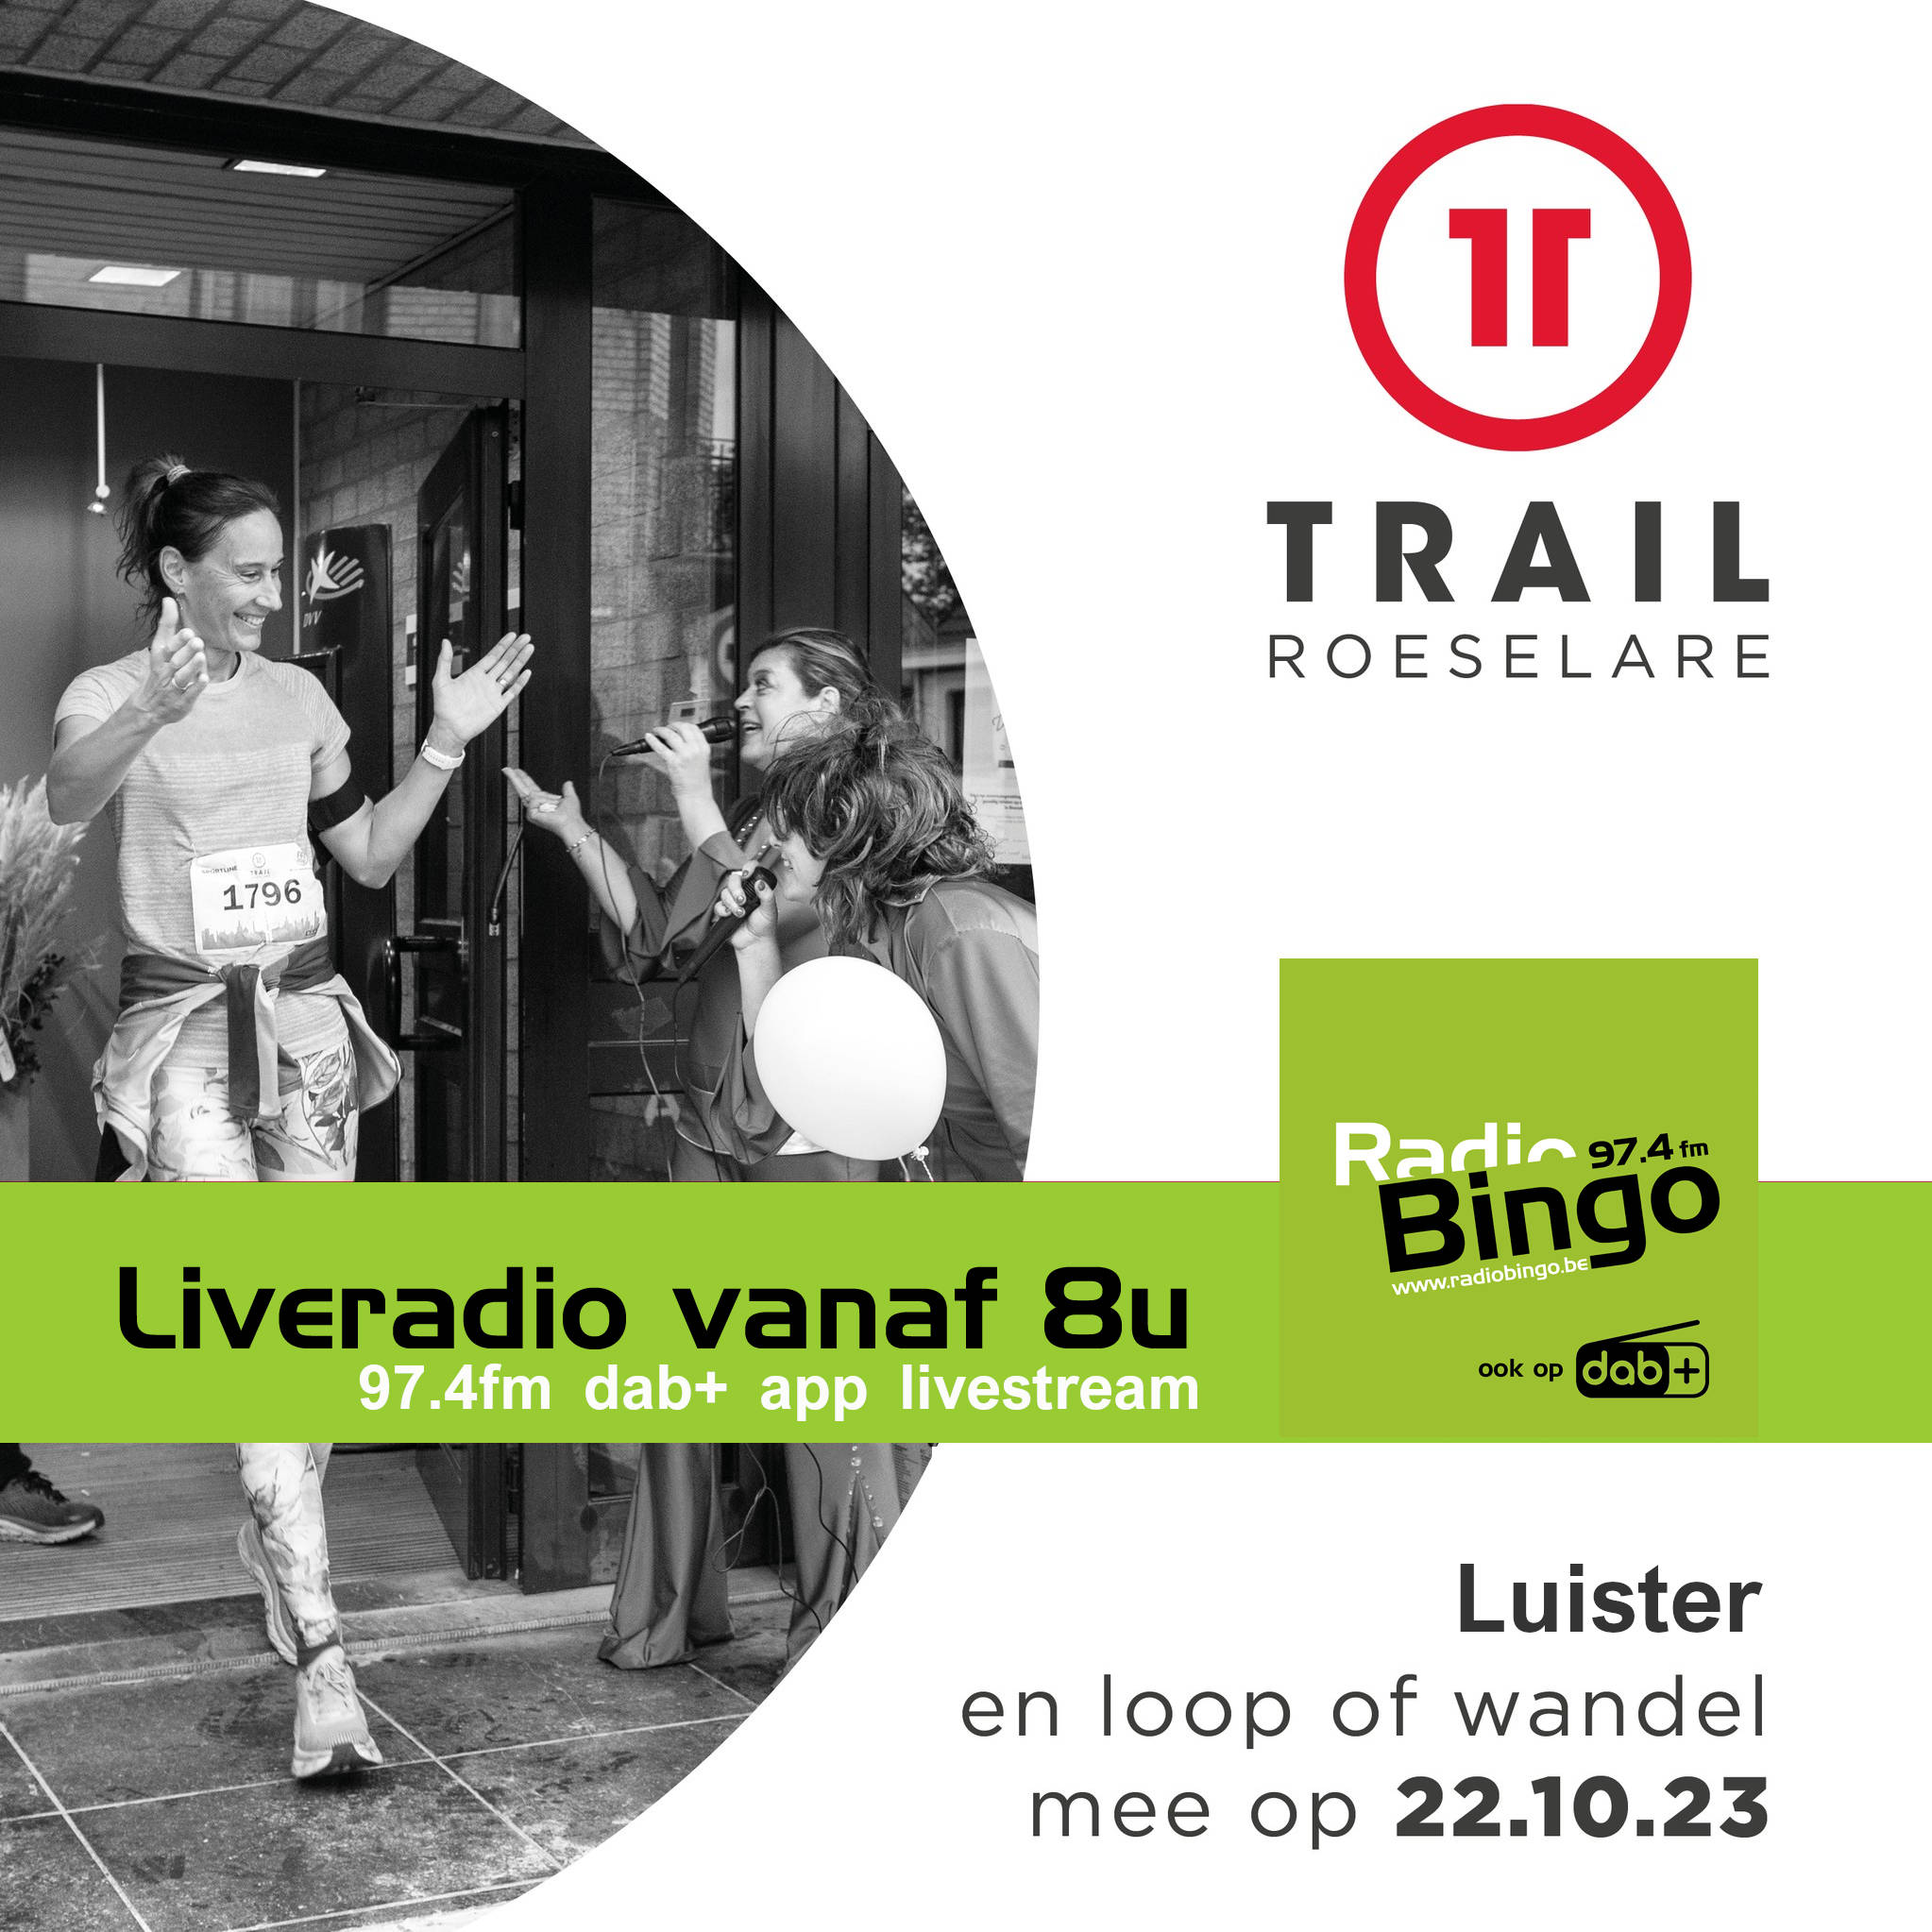 11.Trail Roeselare